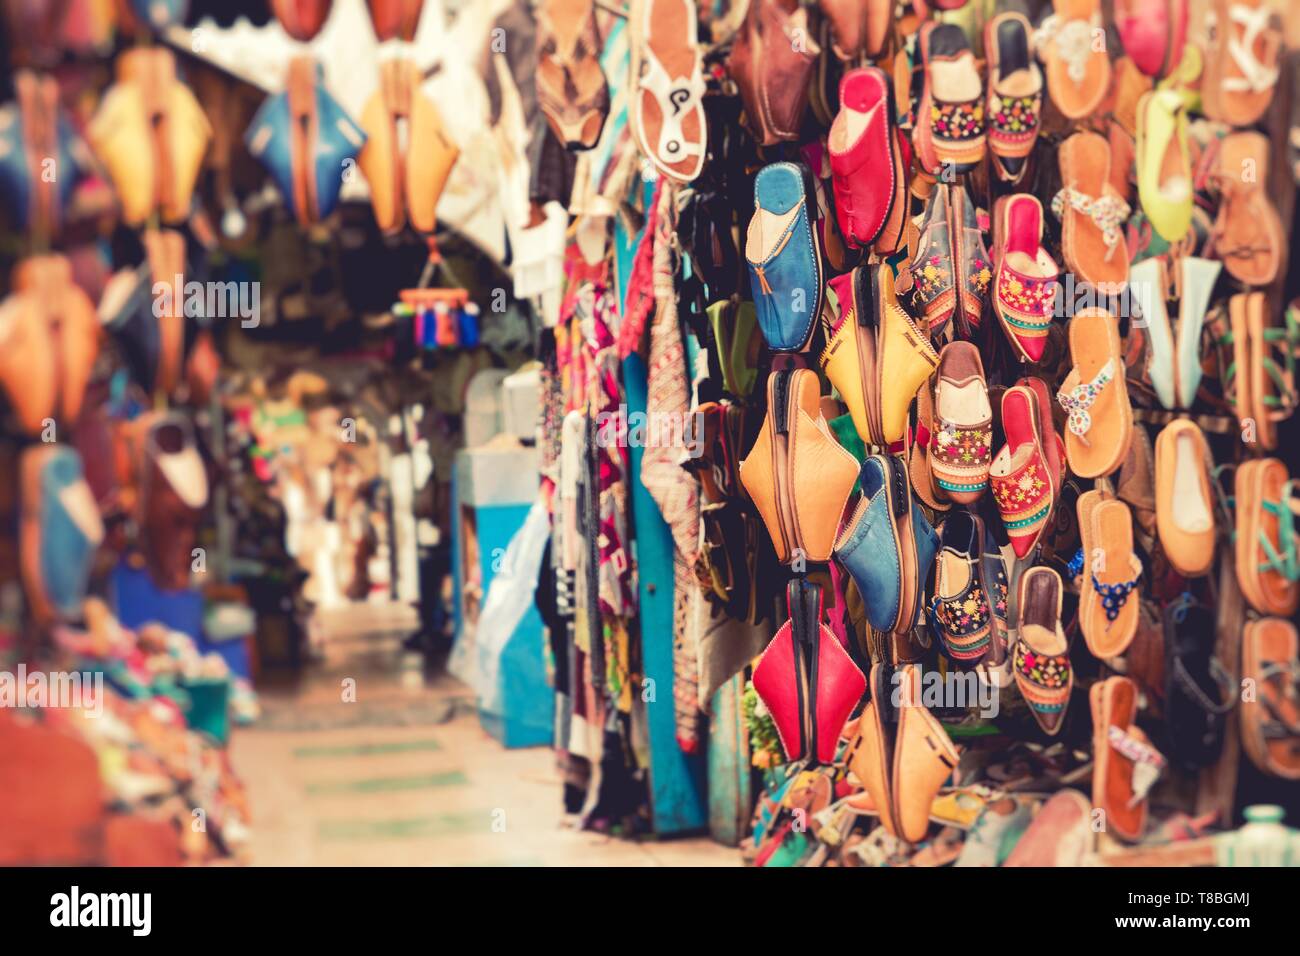 Colorful souvenirs for sale on the street in a shop in Morocco. Stock Photo